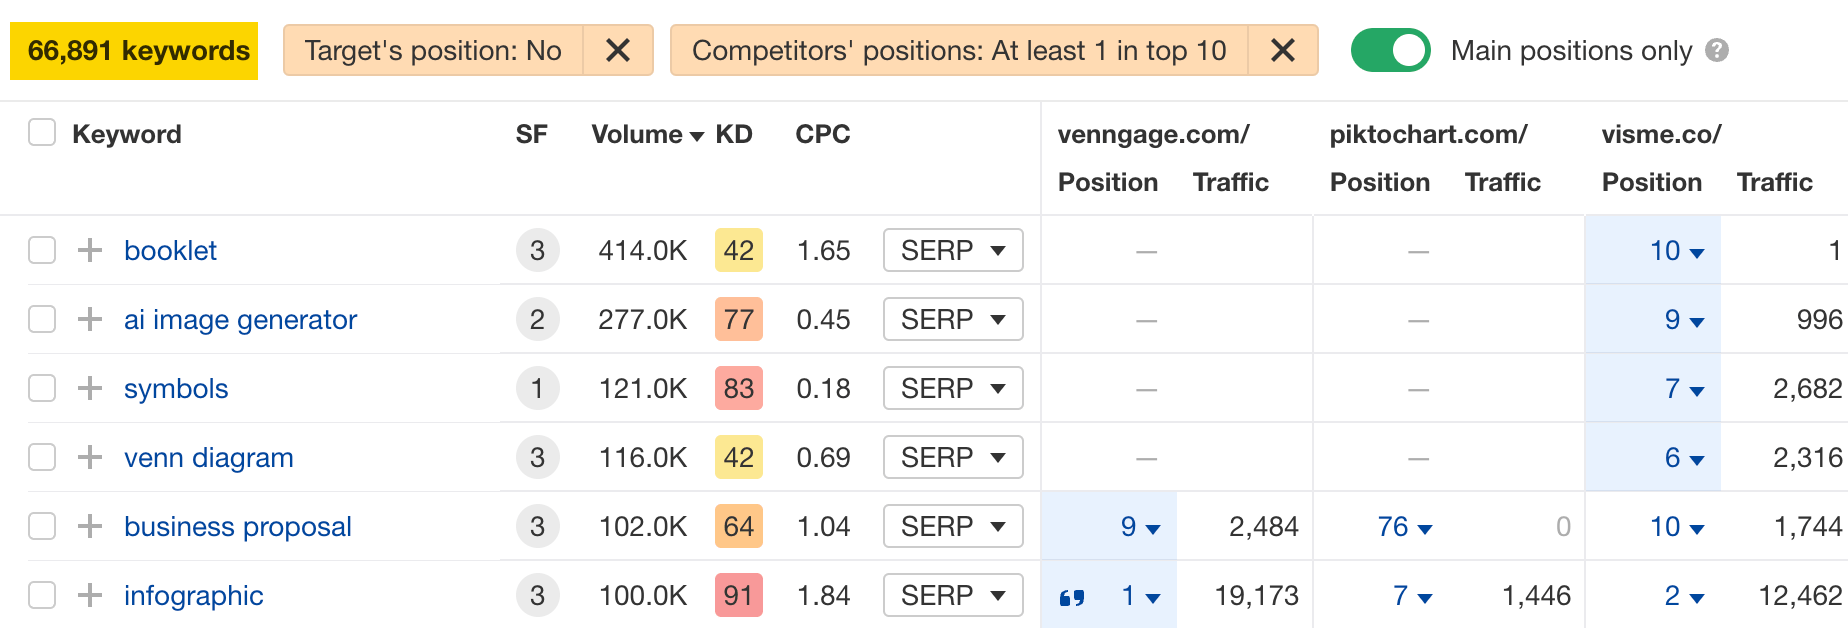 More than 60,000 potential keyword opportunities via Ahrefs' Content Gap report.
